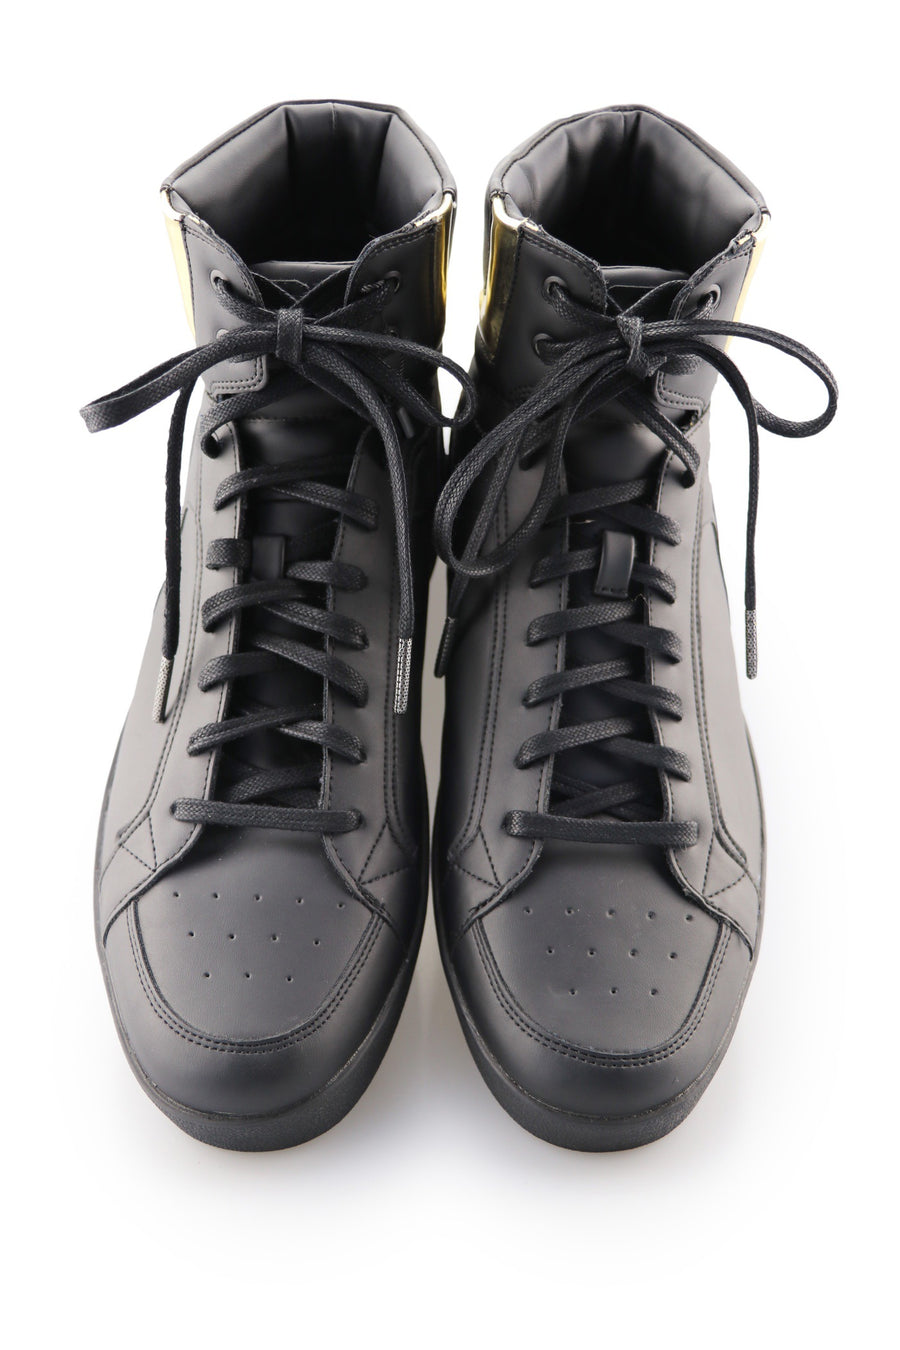 Black Sneaker Shoe Laces Ted and Lemon